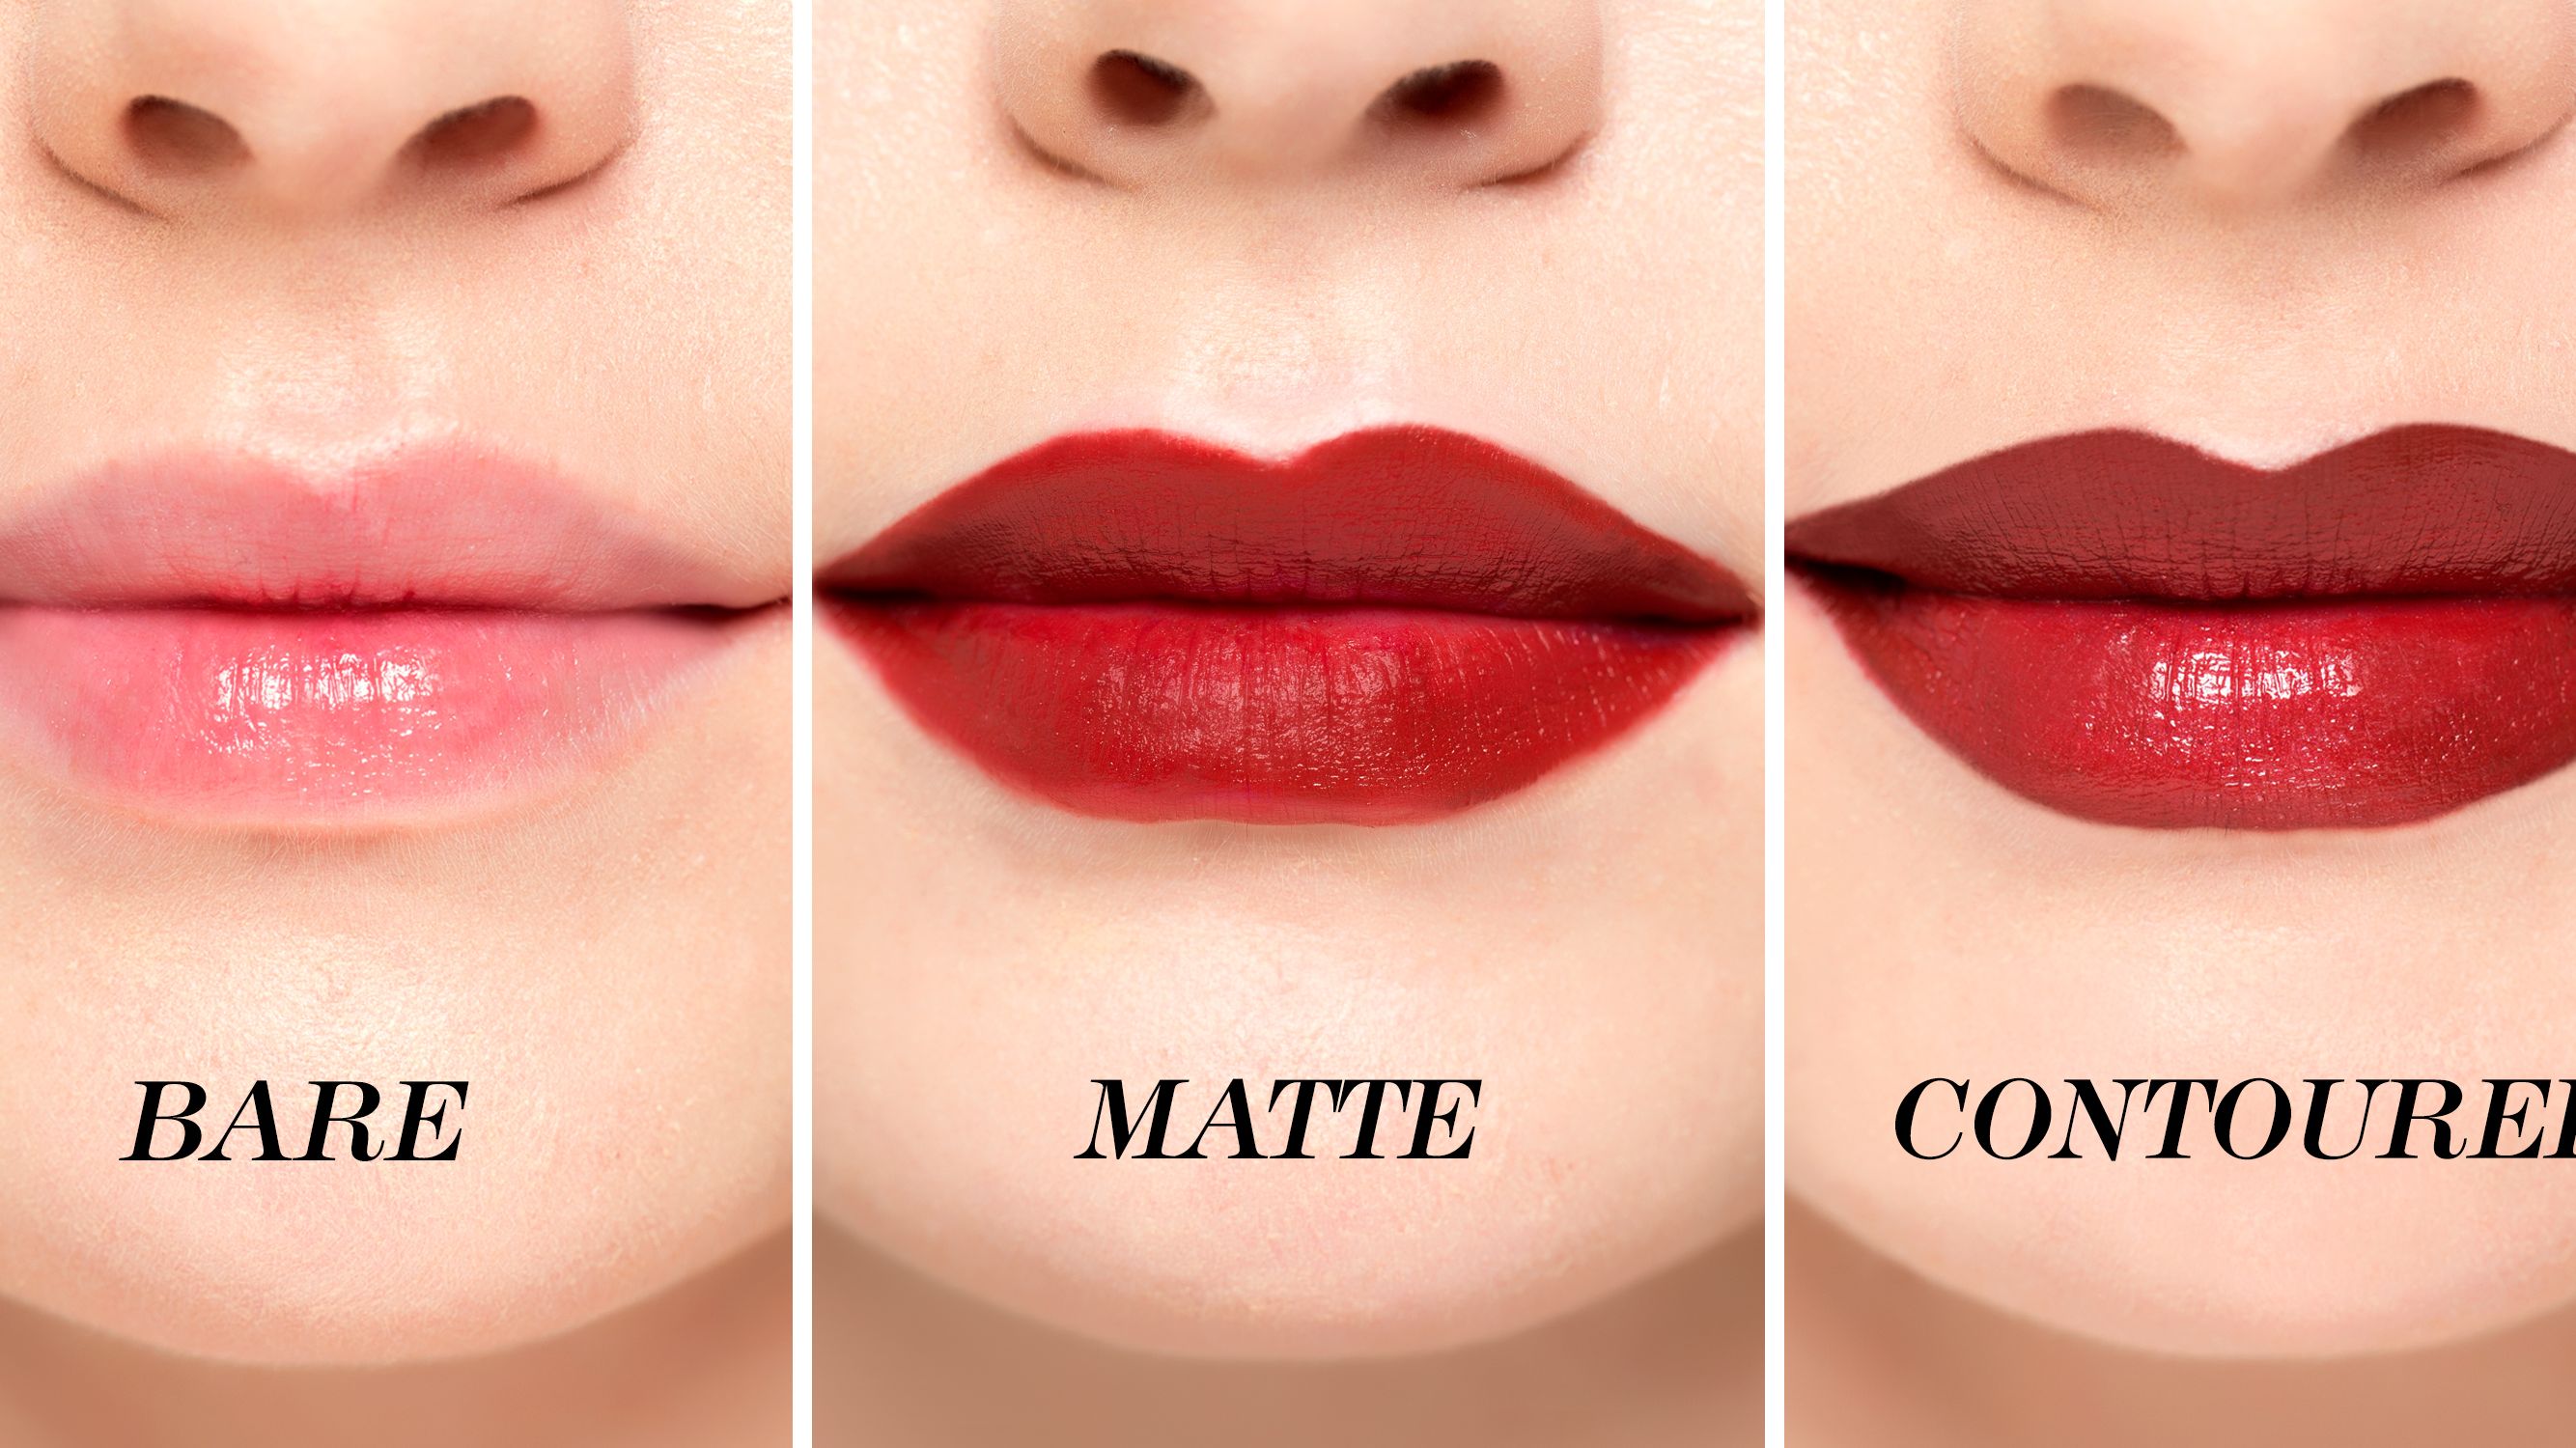 Images Of Lips With Lipstick